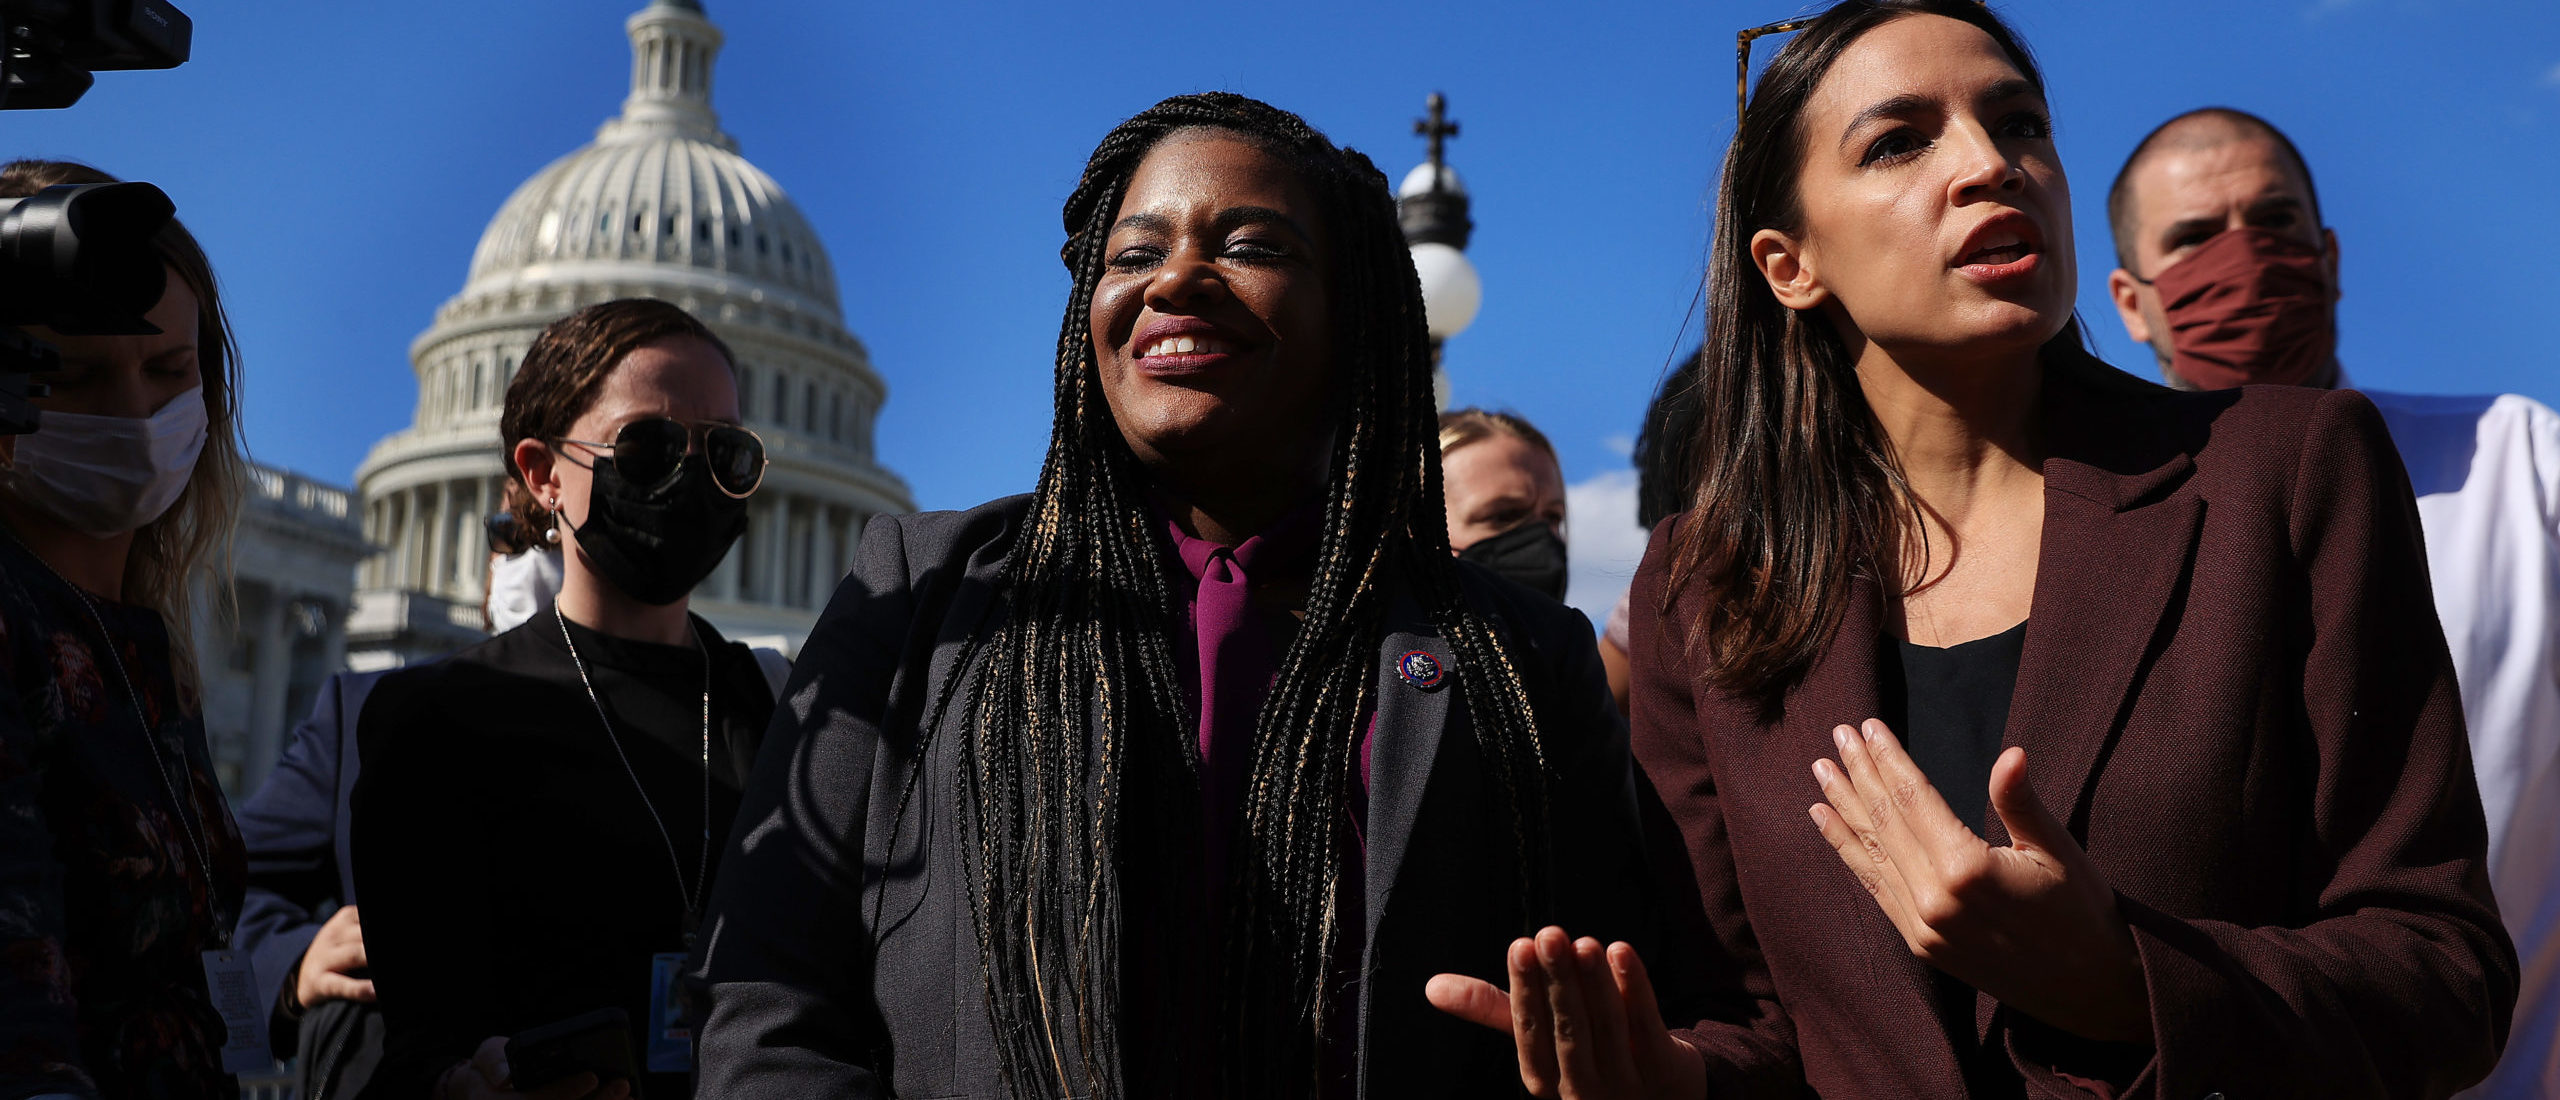 WASHINGTON, DC - SEPTEMBER 30: Congressional Progressive Caucus members Rep. Cori Bush (D-GA) and Rep. Alexandria Ocasio-Cortez (D-NY) talk to reporters before a vote to keep the federal government open until early December outside the U.S. Capitol on September 30, 2021 in Washington, DC. (Photo by Chip Somodevilla/Getty Images)